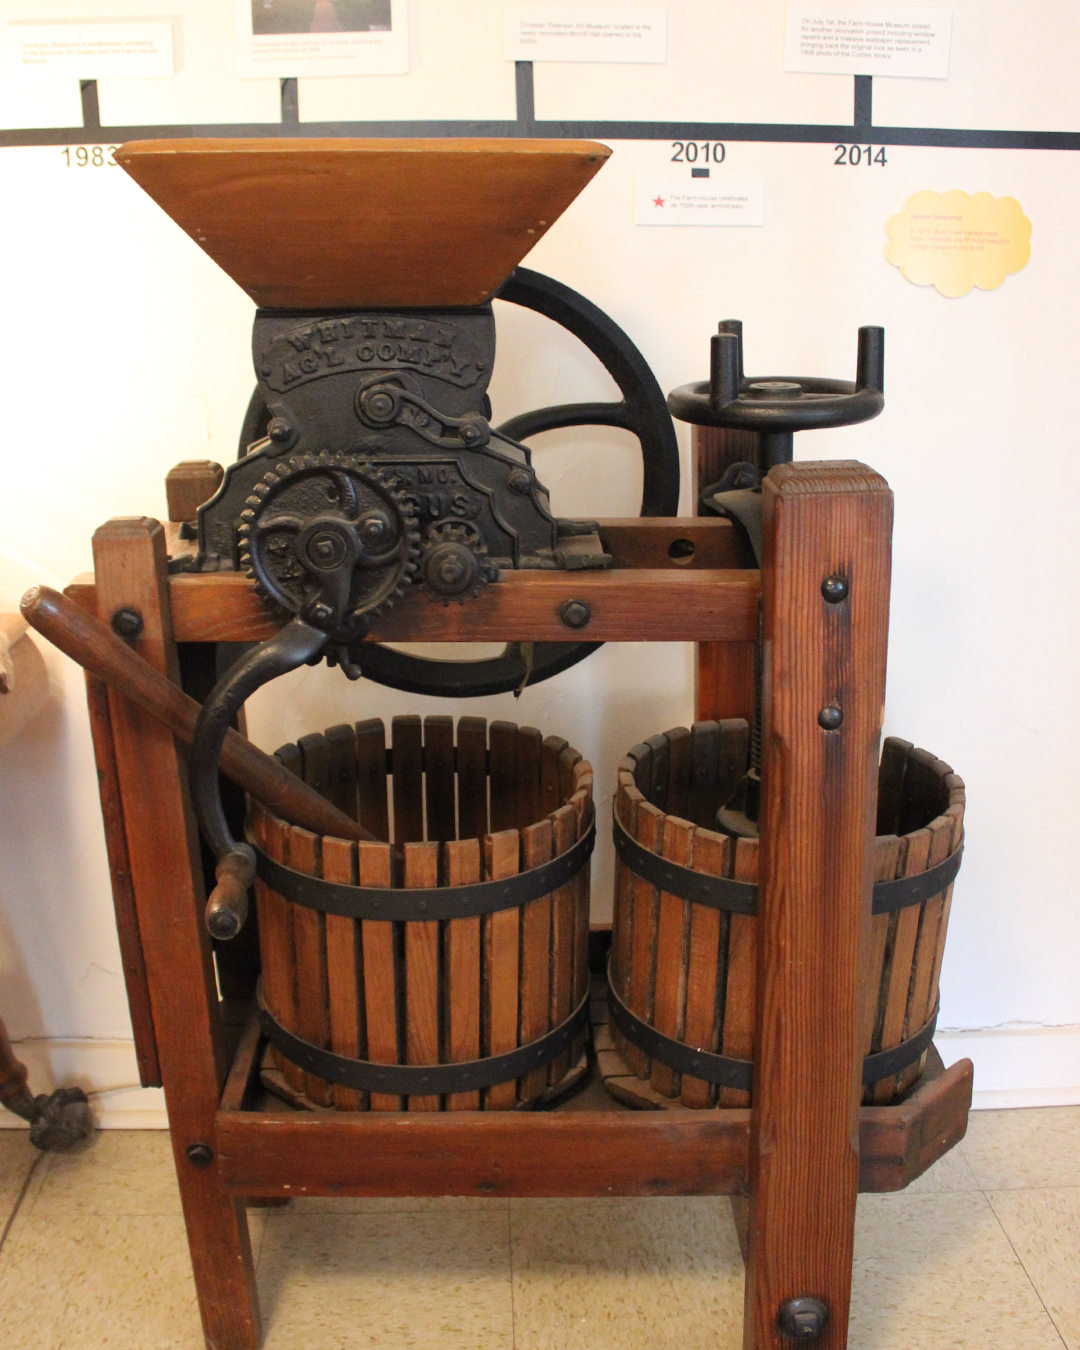 View post titled The Ingenuity of the Cider Press